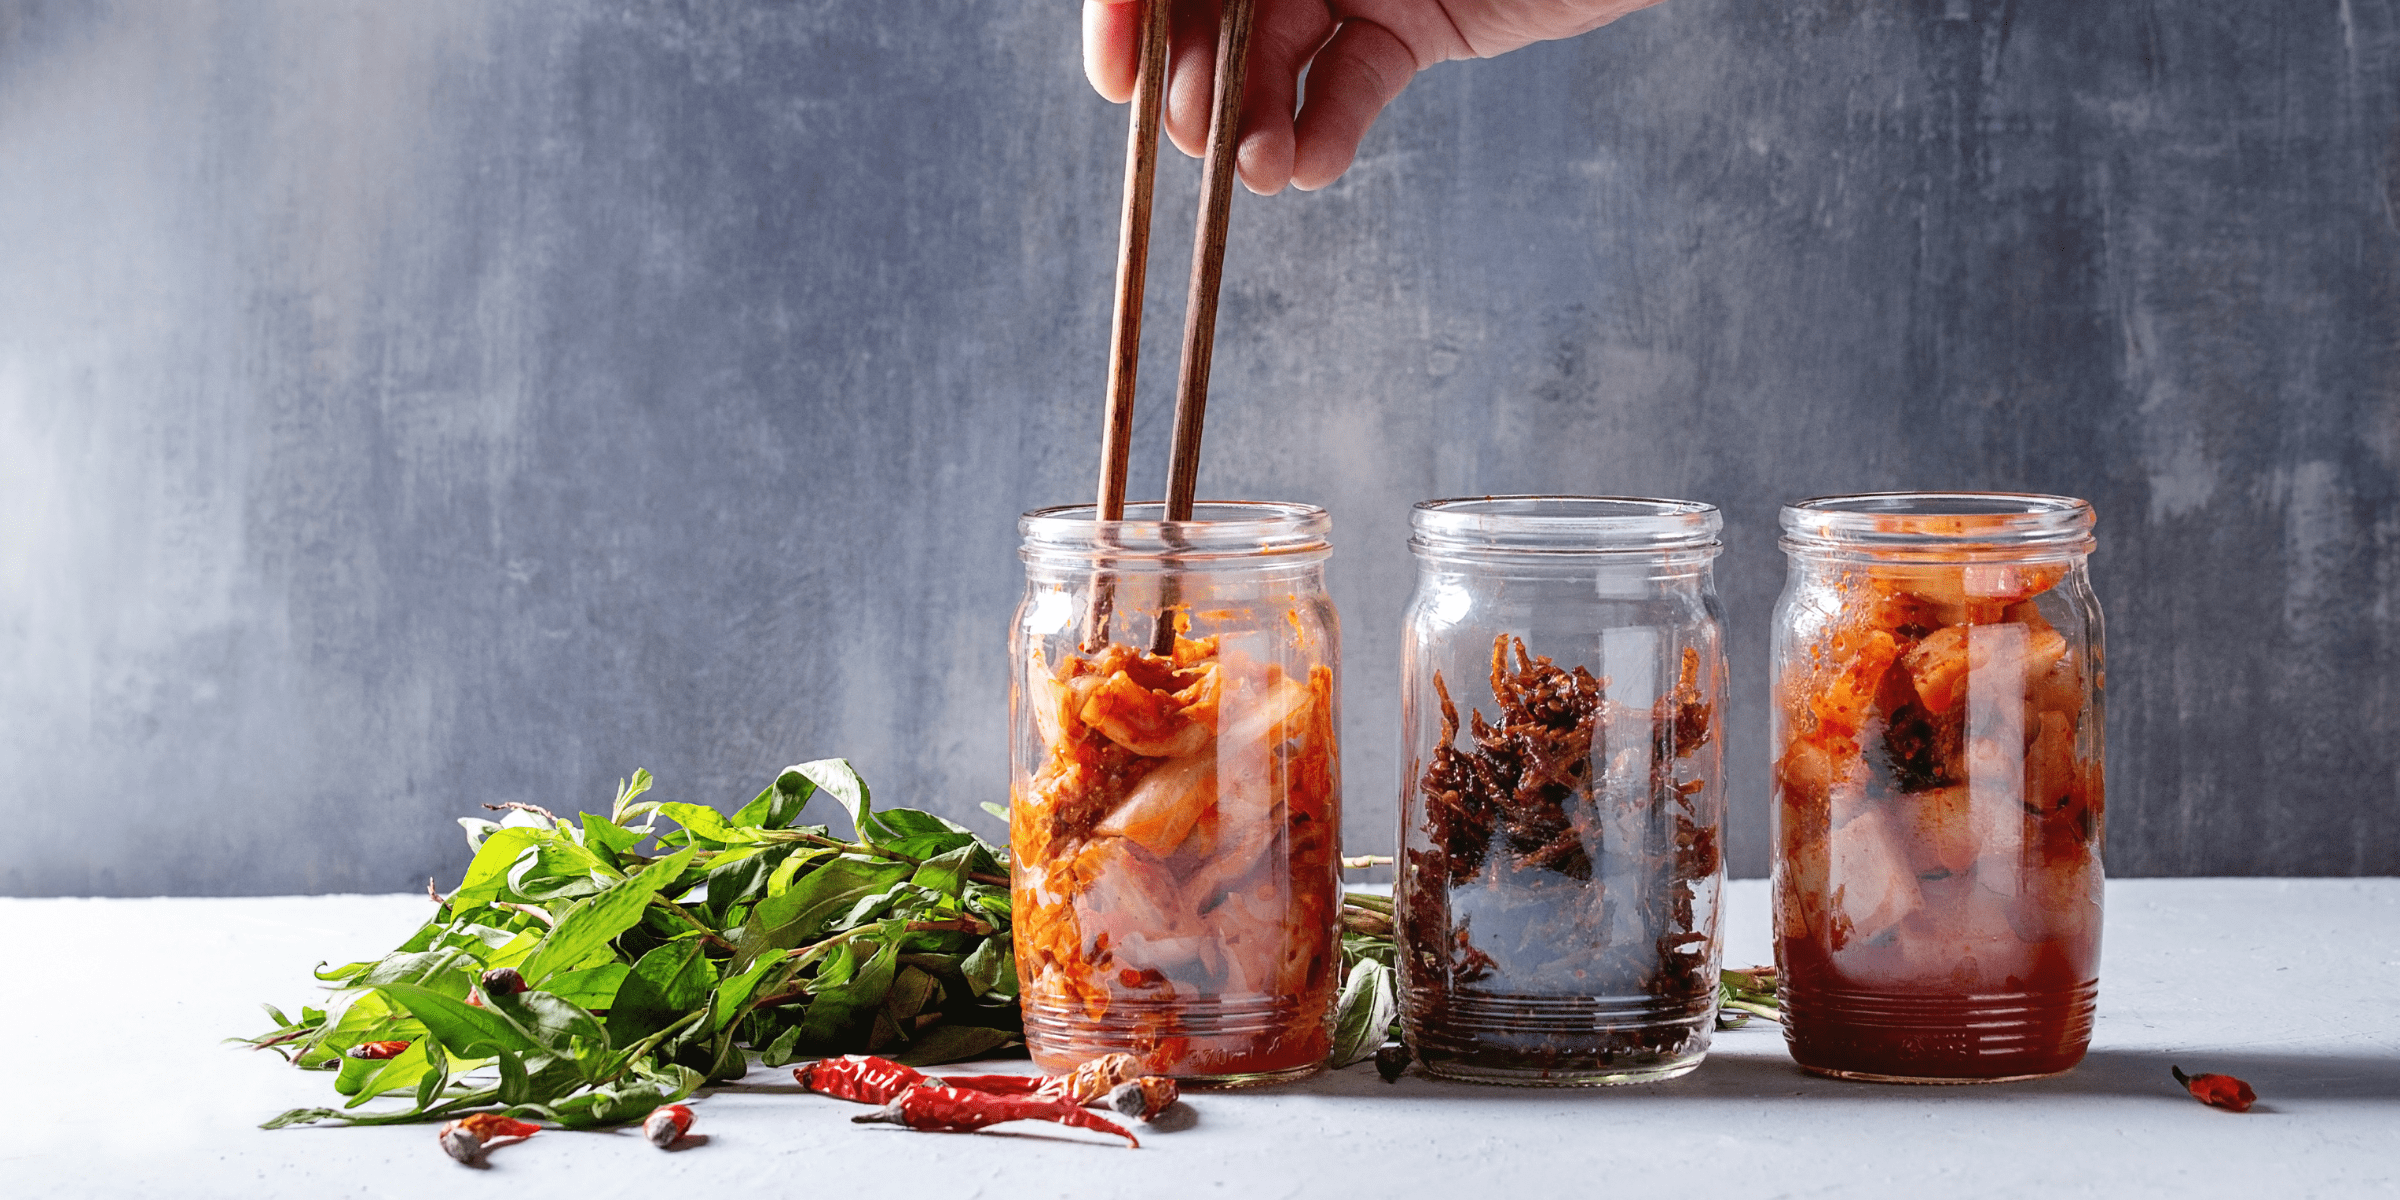 kimchi contains Probiotics for Gluten Issues